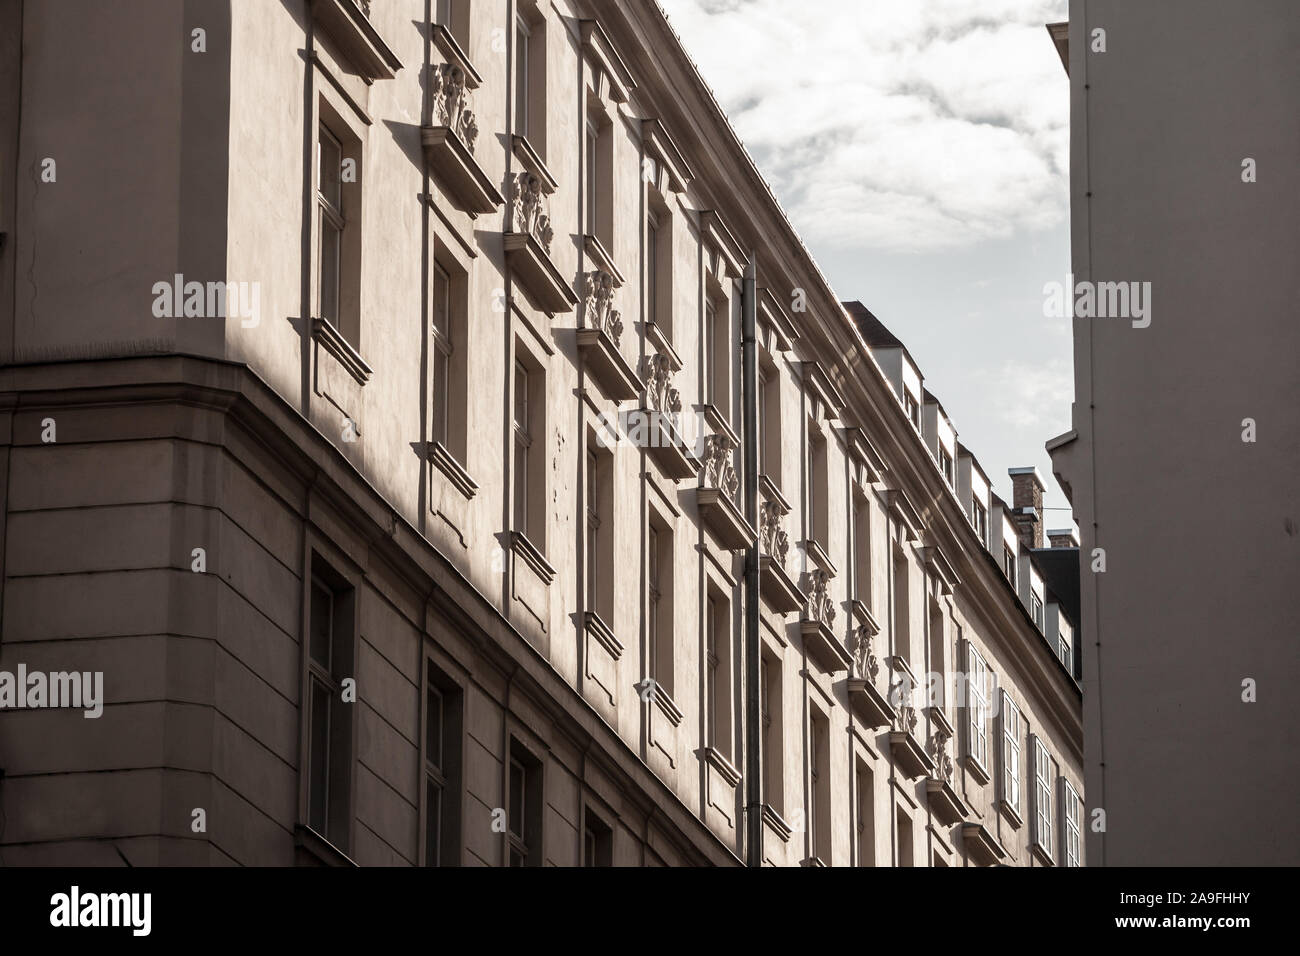 Typical Austro-Hungarian Facades wit old windows in a street of Innere Stadt, the inner city of Vienna, Austria, in the 1st Bezirk district of the Aus Stock Photo